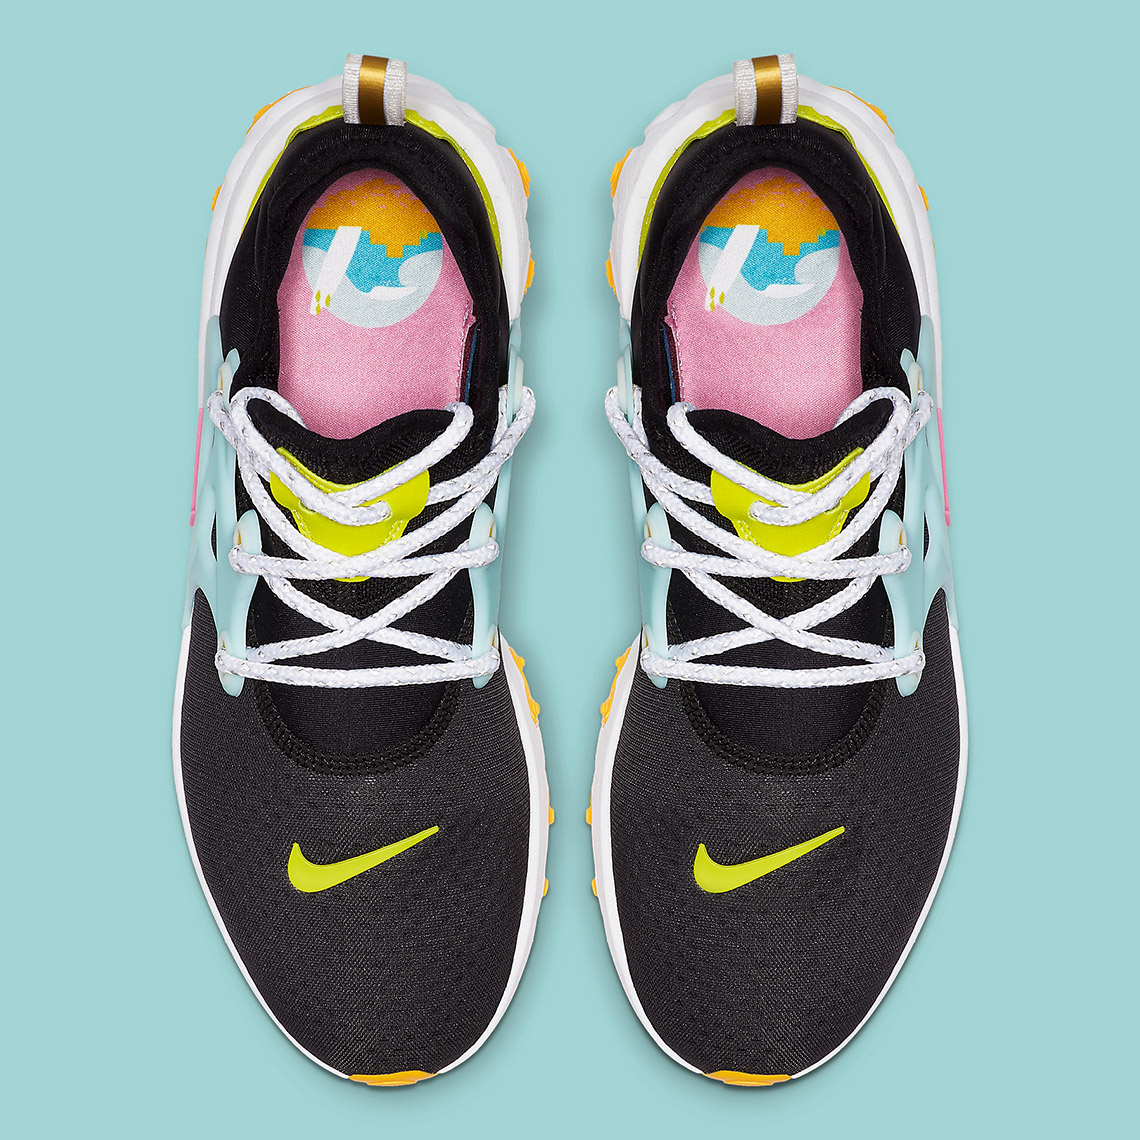 nike presto at outlet stores